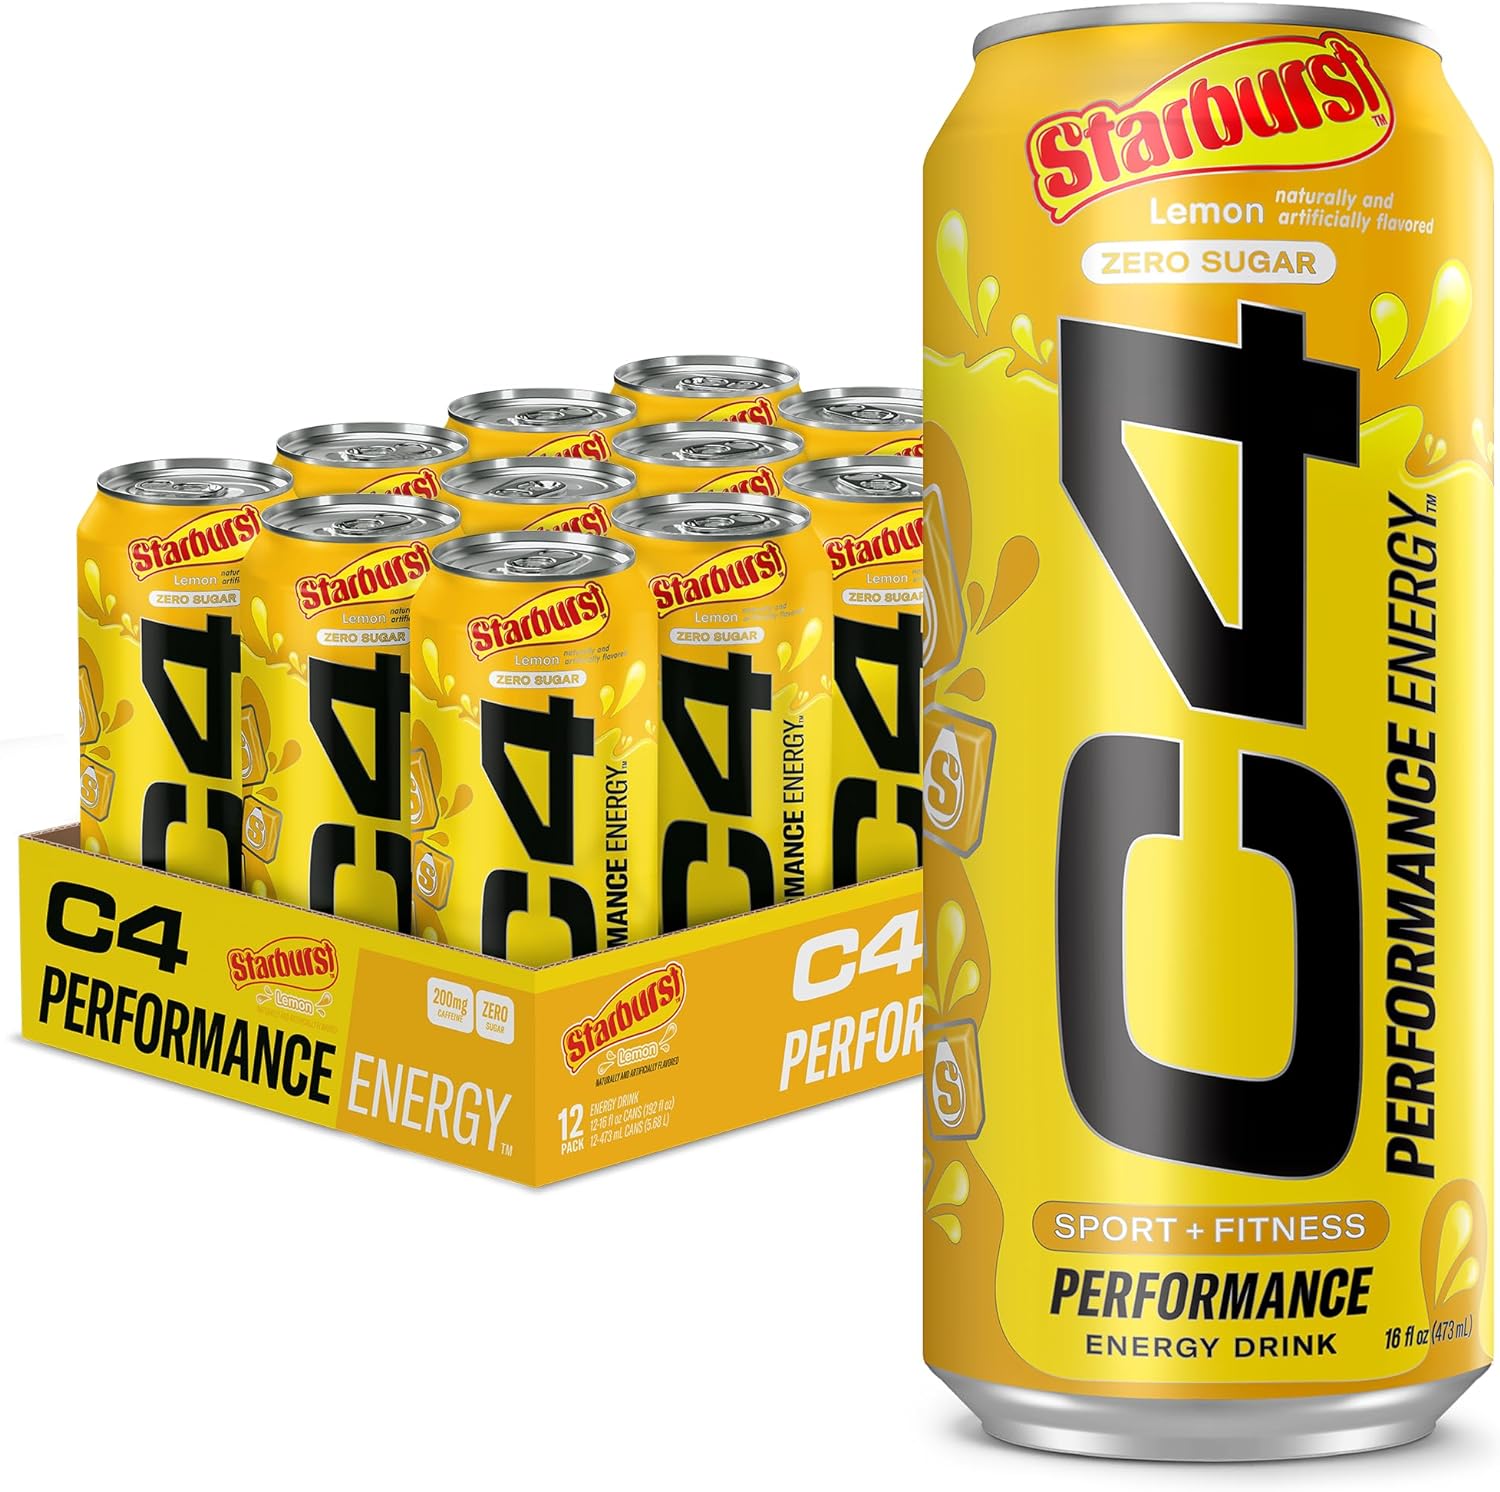 15-refreshing-facts-about-c4-energy-drink